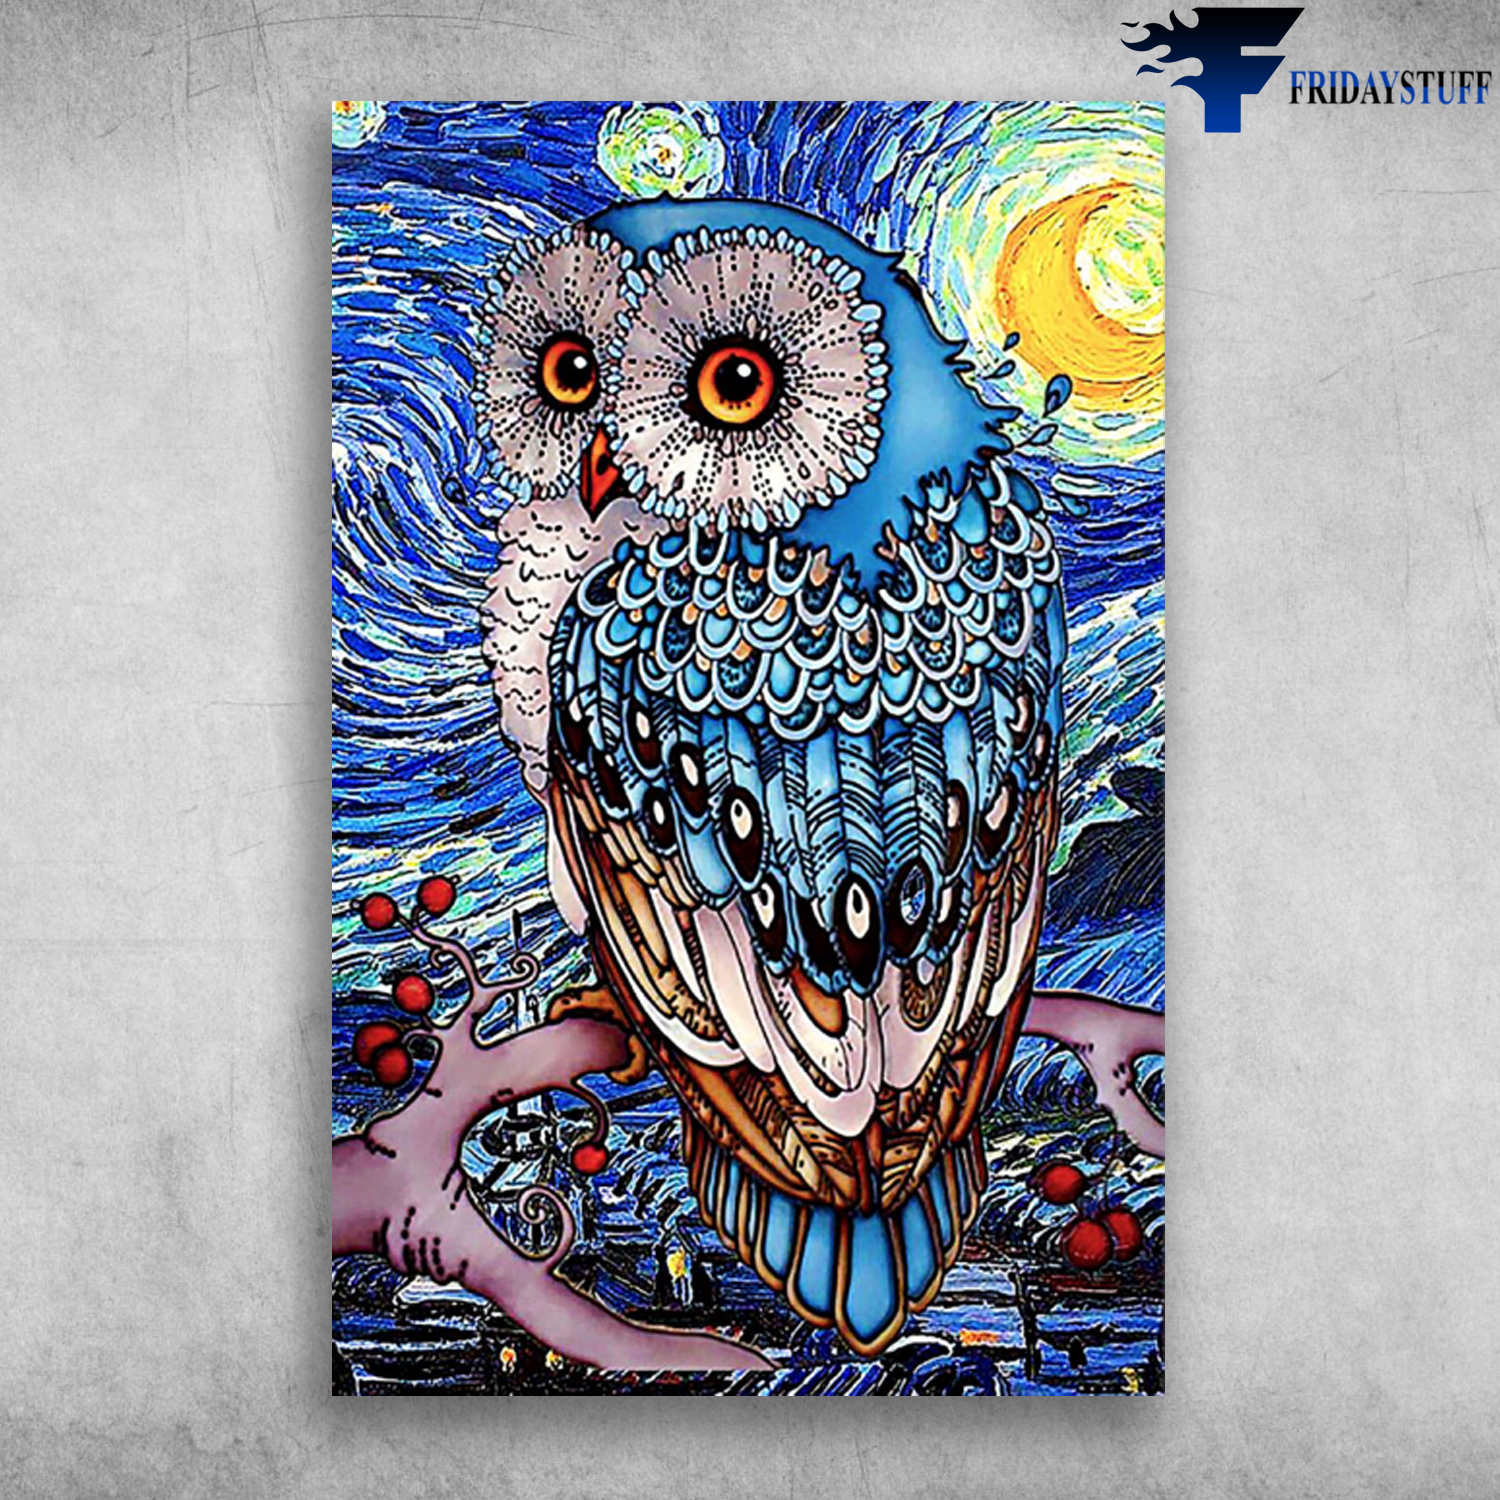 colorful owl images